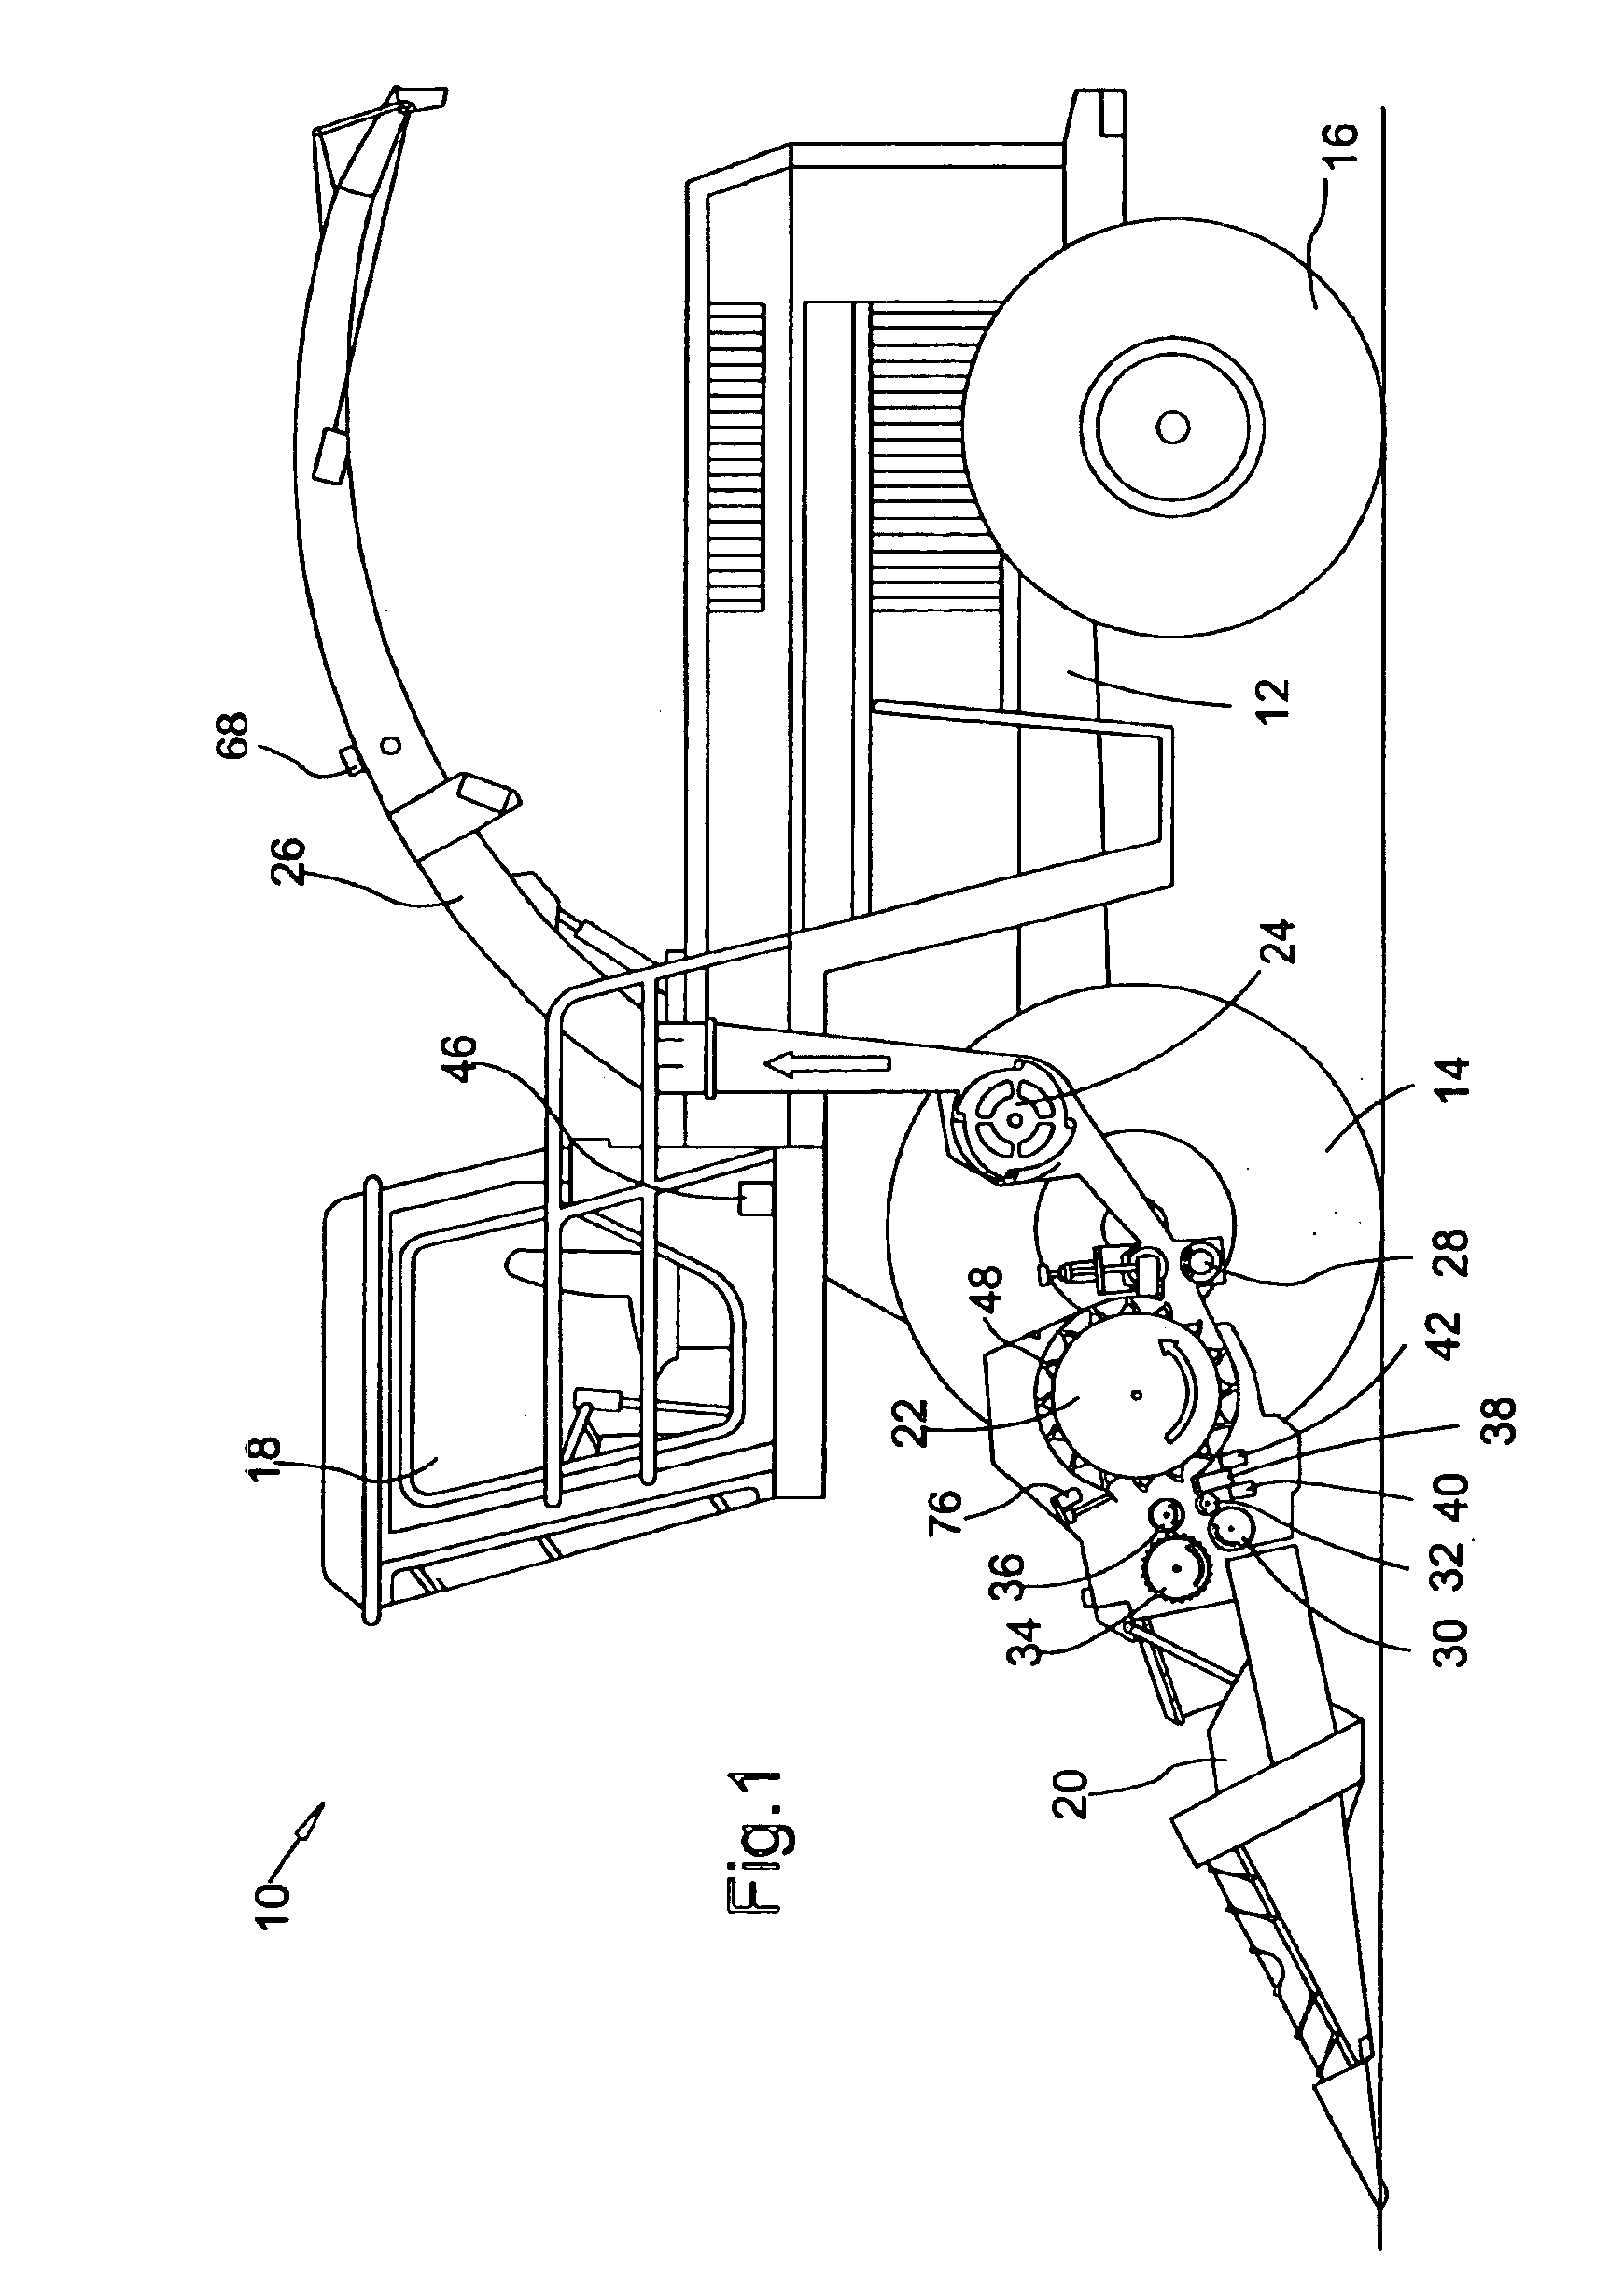 Device for measuring and/or checking the distance between a shear bar and a chopping knife